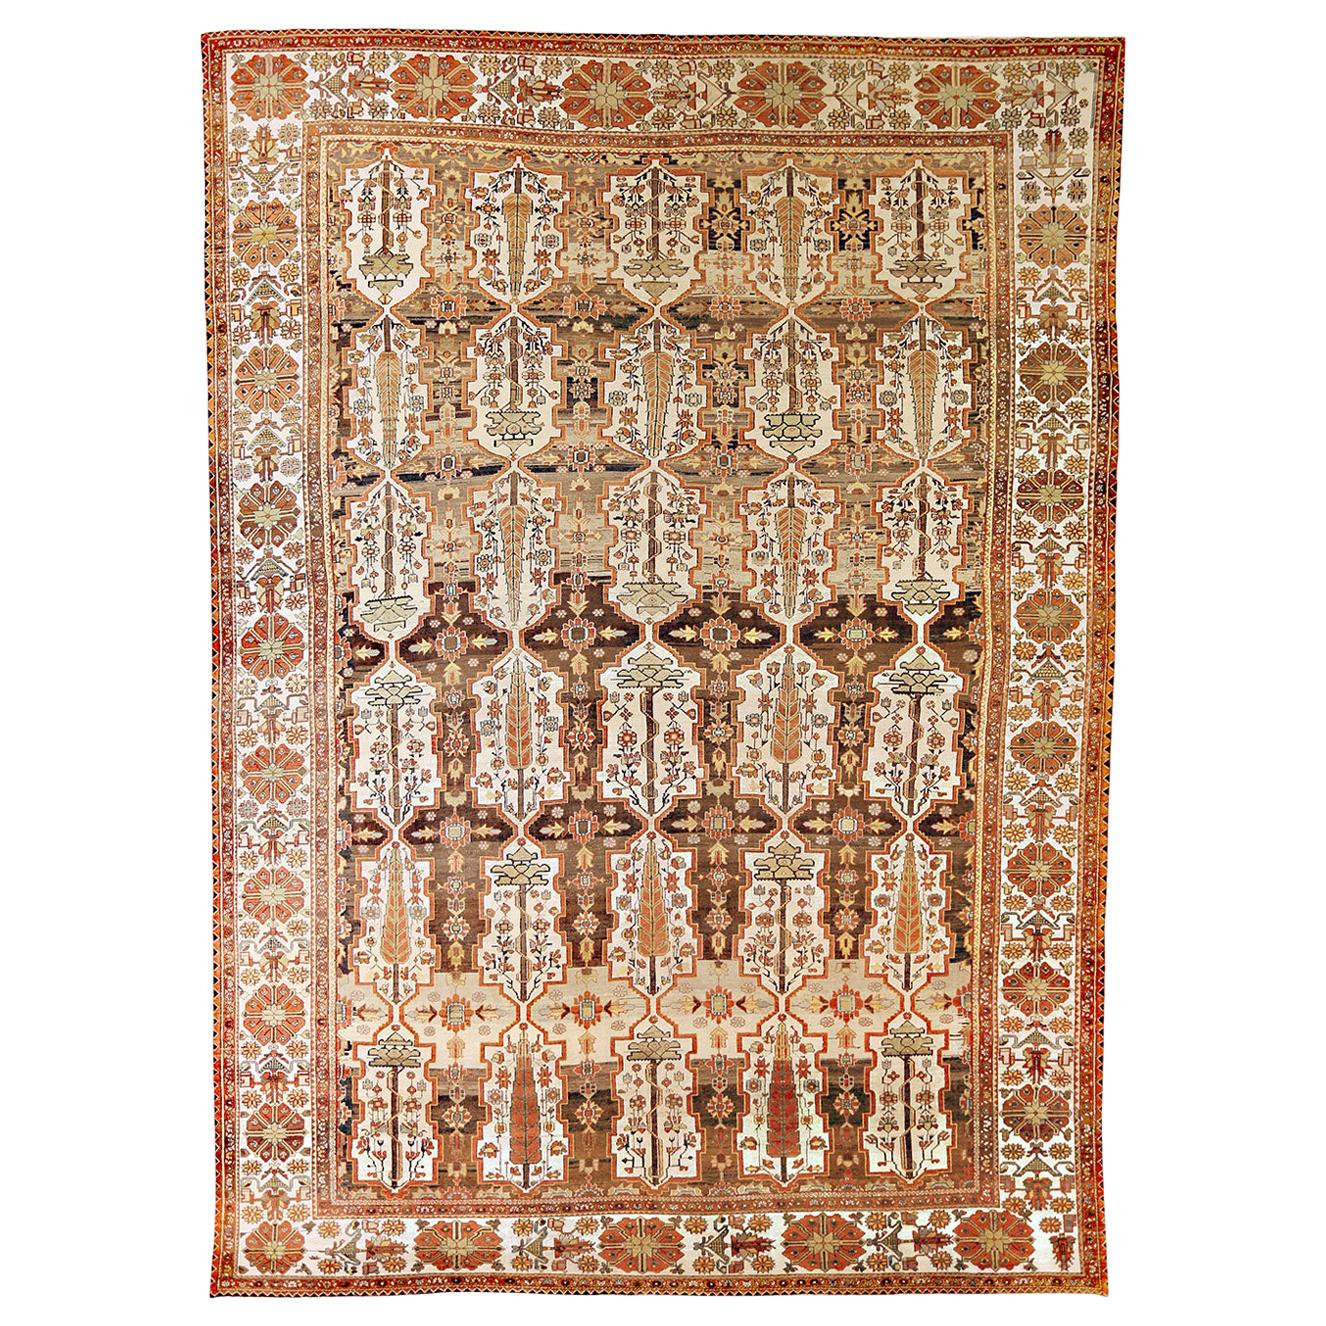 Oversize Antique Persian Bakhtiar Rug with Tribal Details on Ivory & White Field